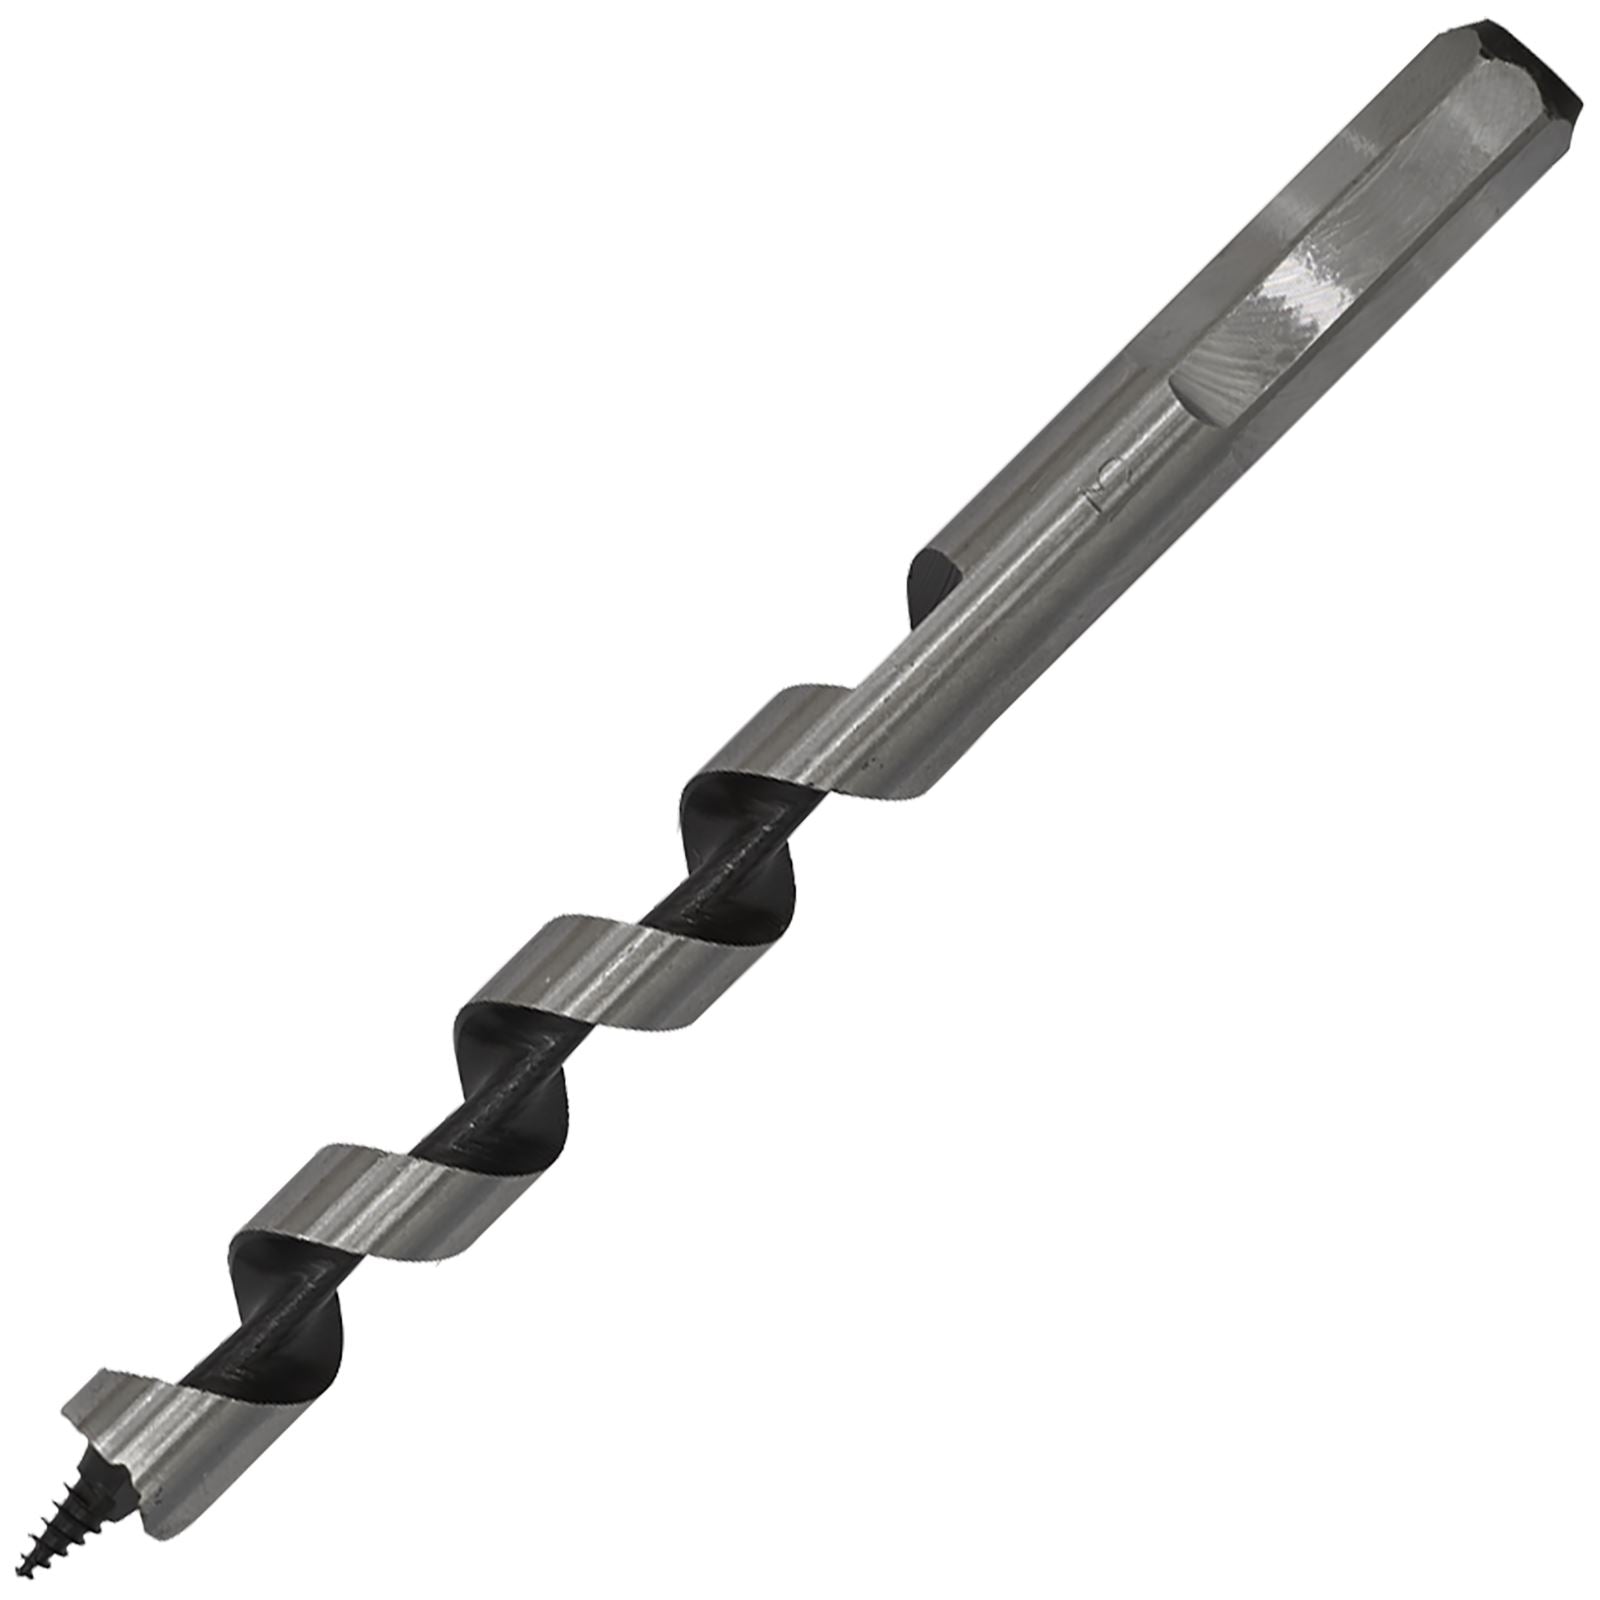 Worksafe by Sealey Auger Wood Drill Bit 13mm x 155mm